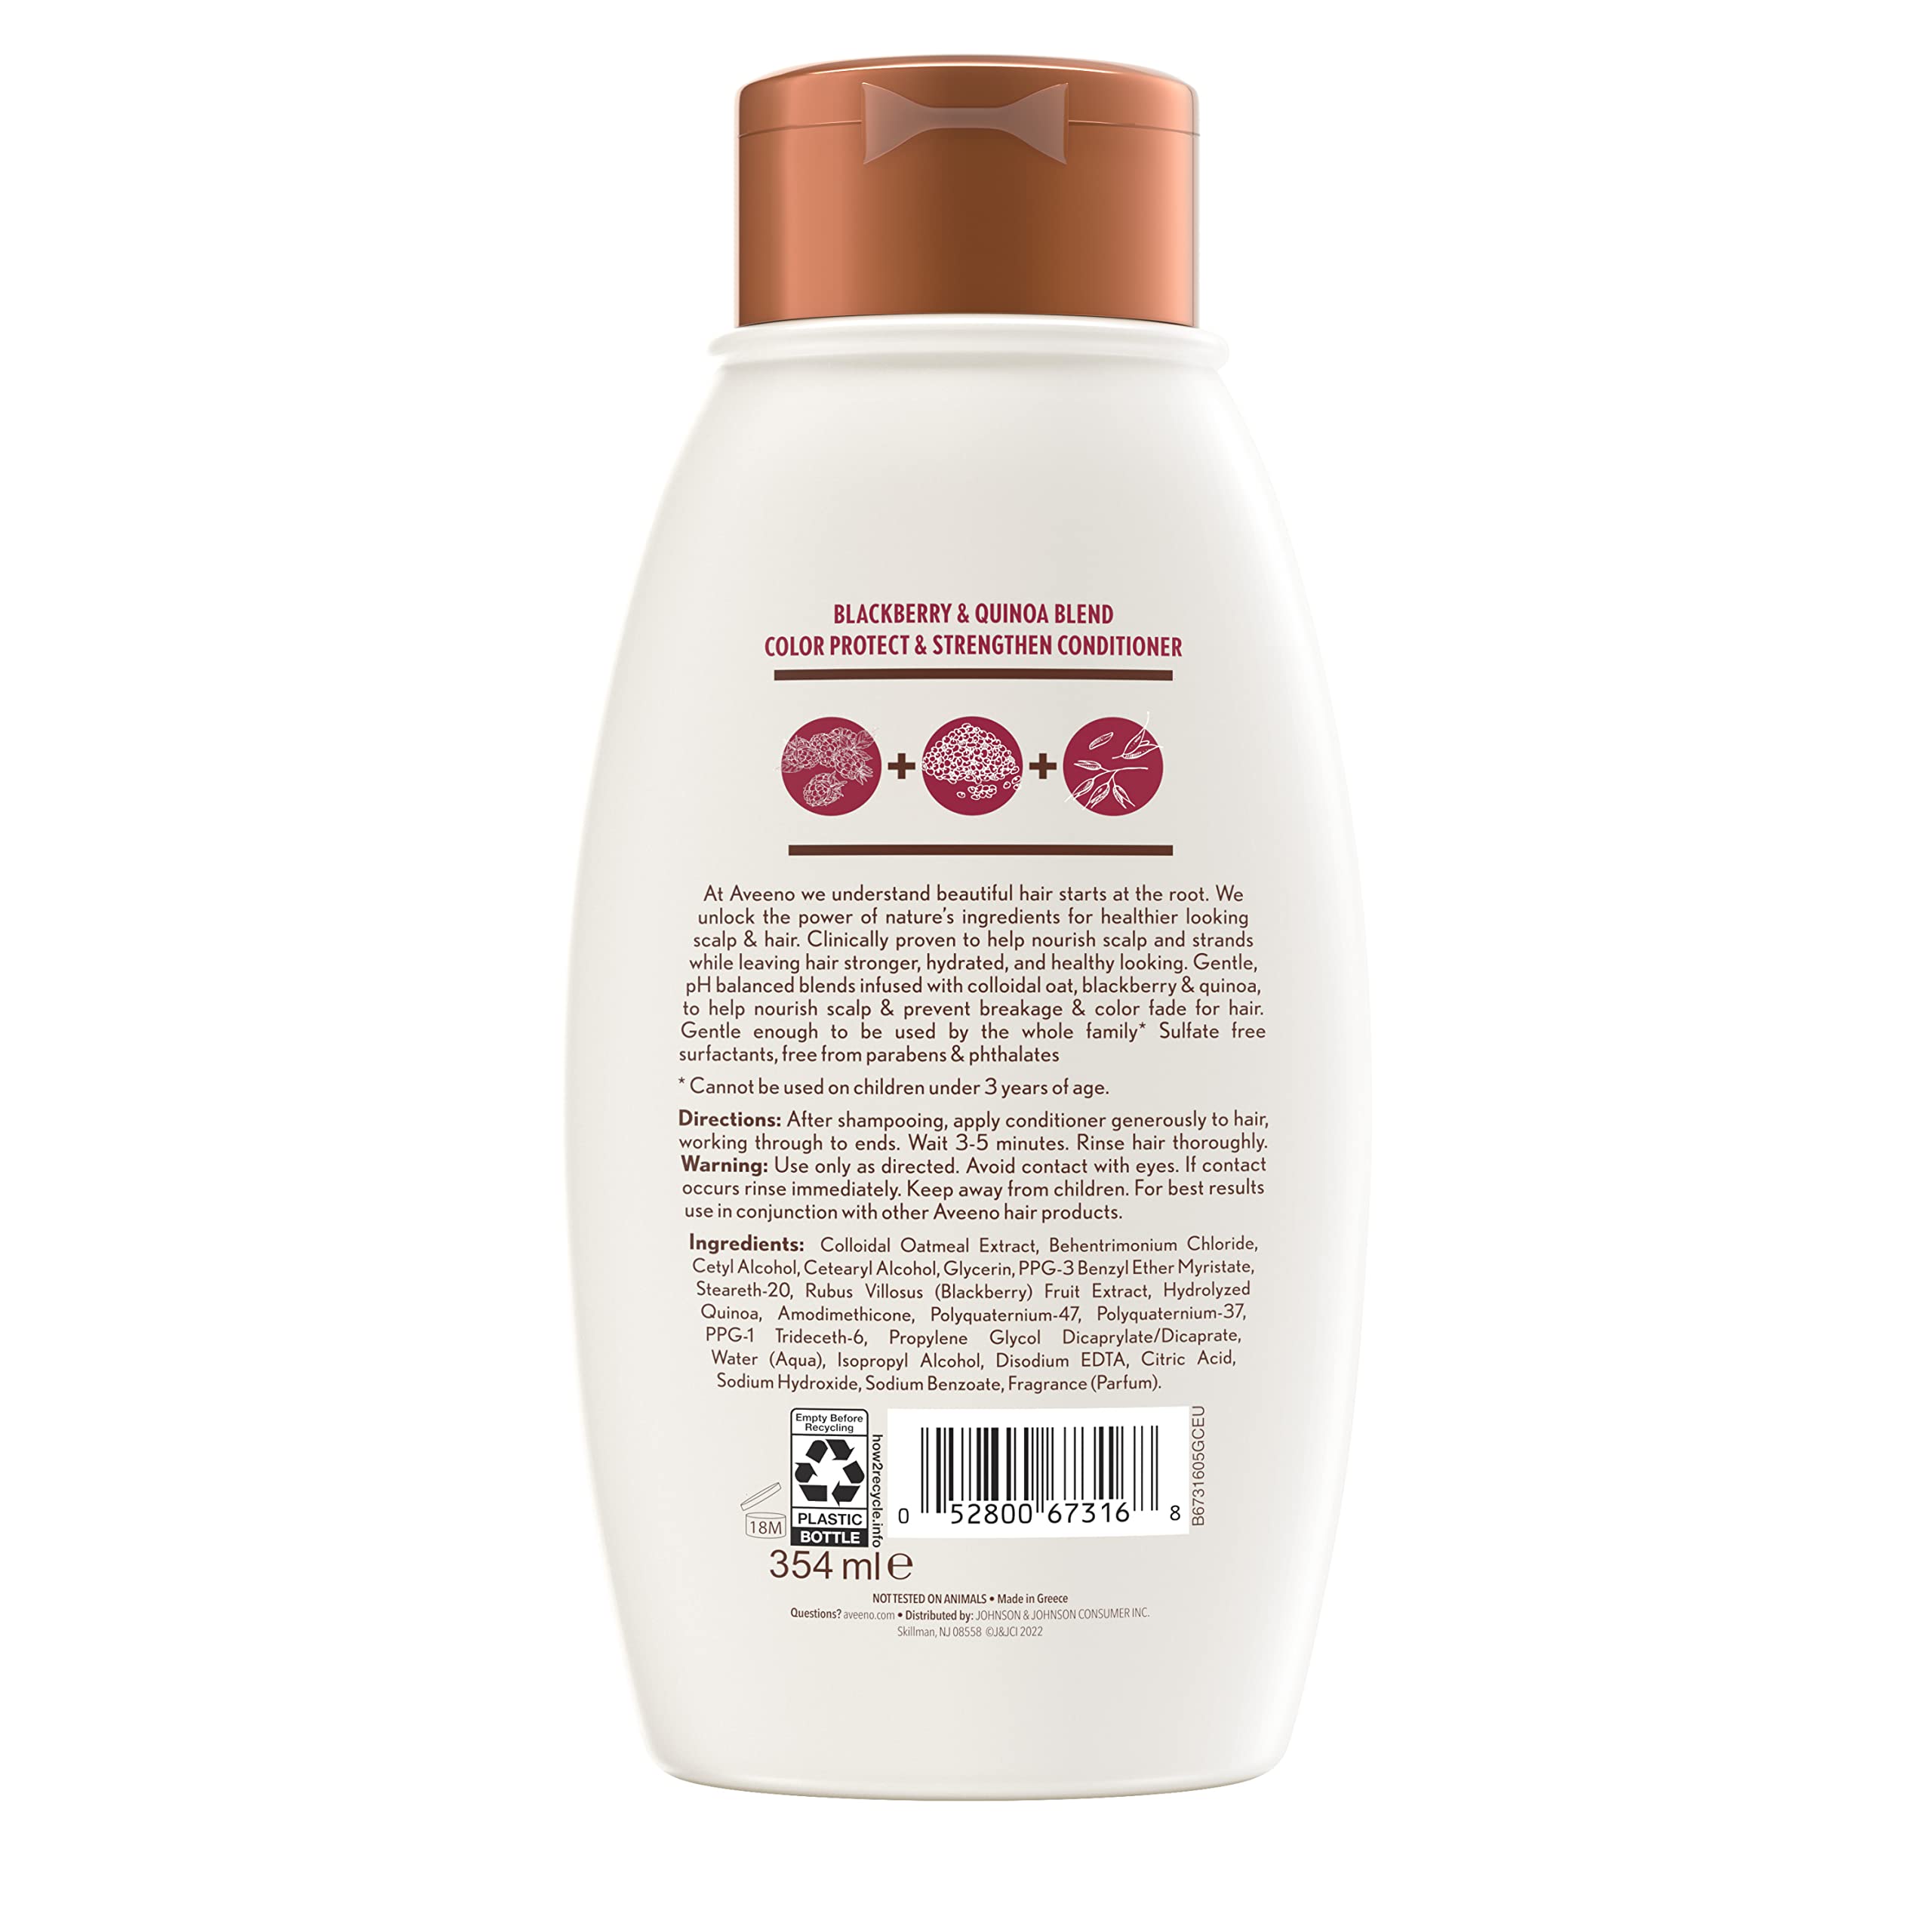 Aveeno Blackberry Quinoa Protein Blend Sulfate-Free Conditioner for Color-Treated Hair Protection, Daily Strengthening & Moisturizing Conditioner, Paraben & Dye-Free, 12 Fl Oz